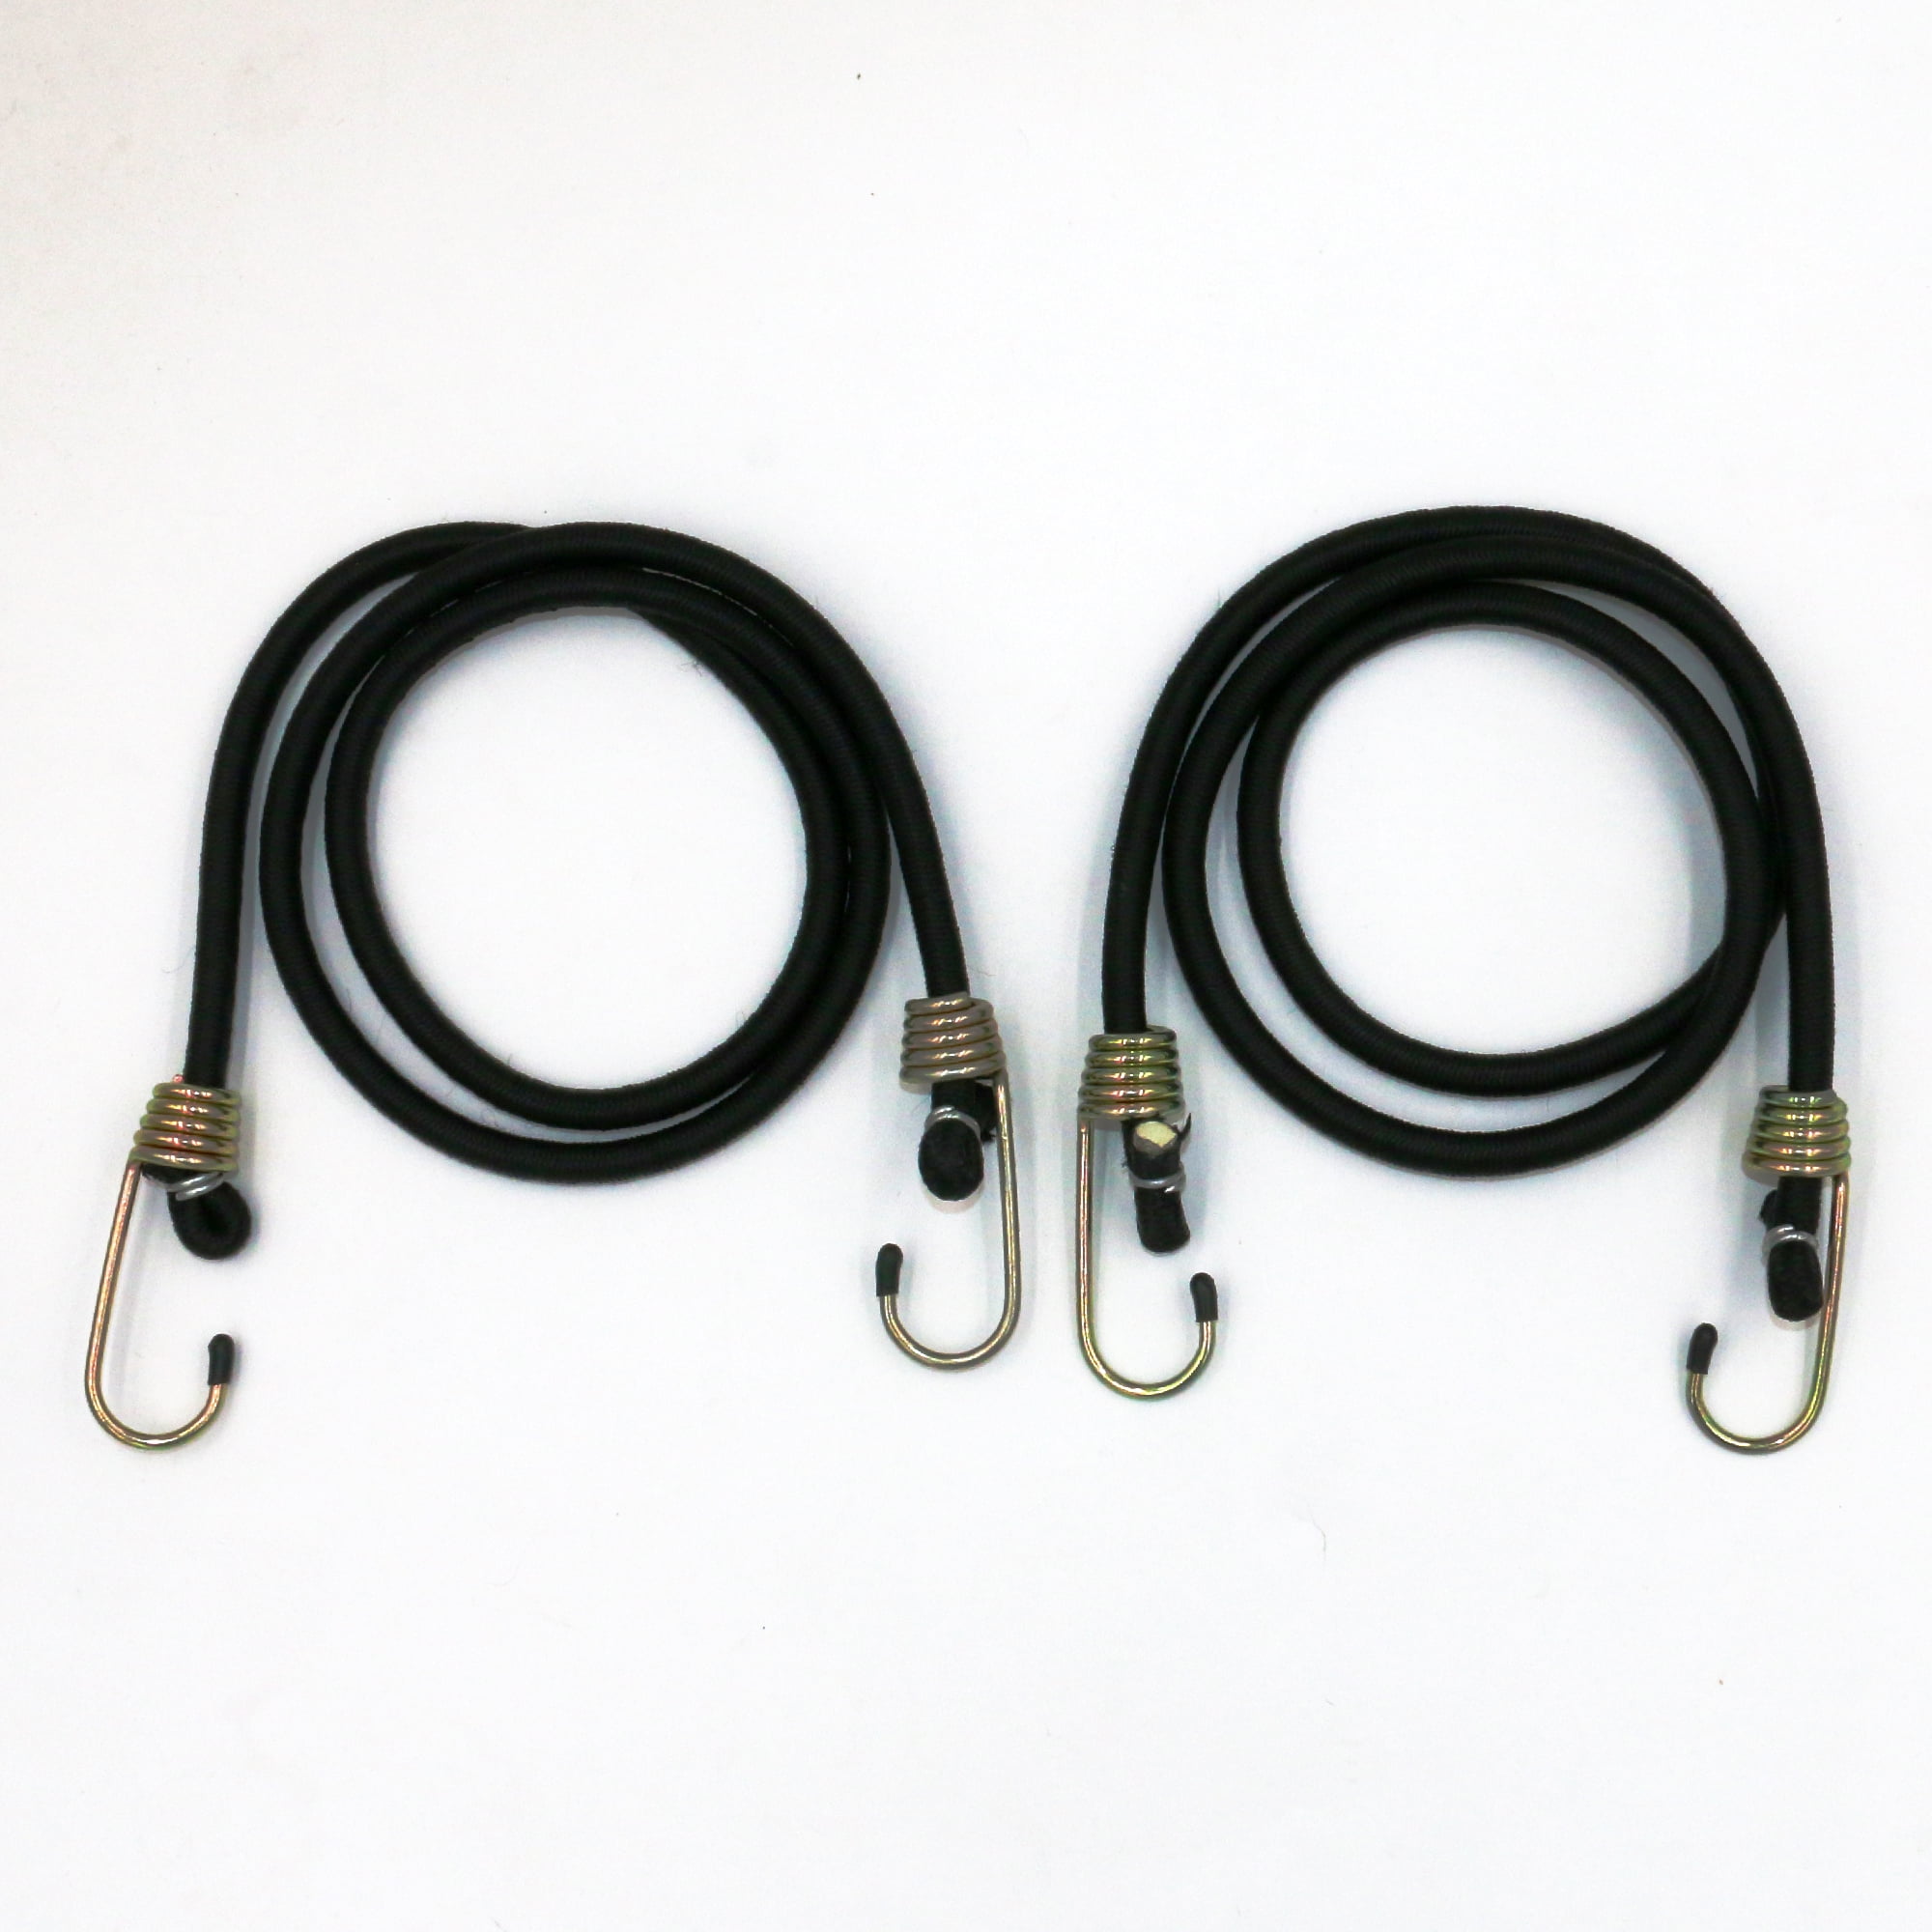 Hyper Tough 48 inch Heavy Duty Black Rubber Bungee Cords 2 Pack 